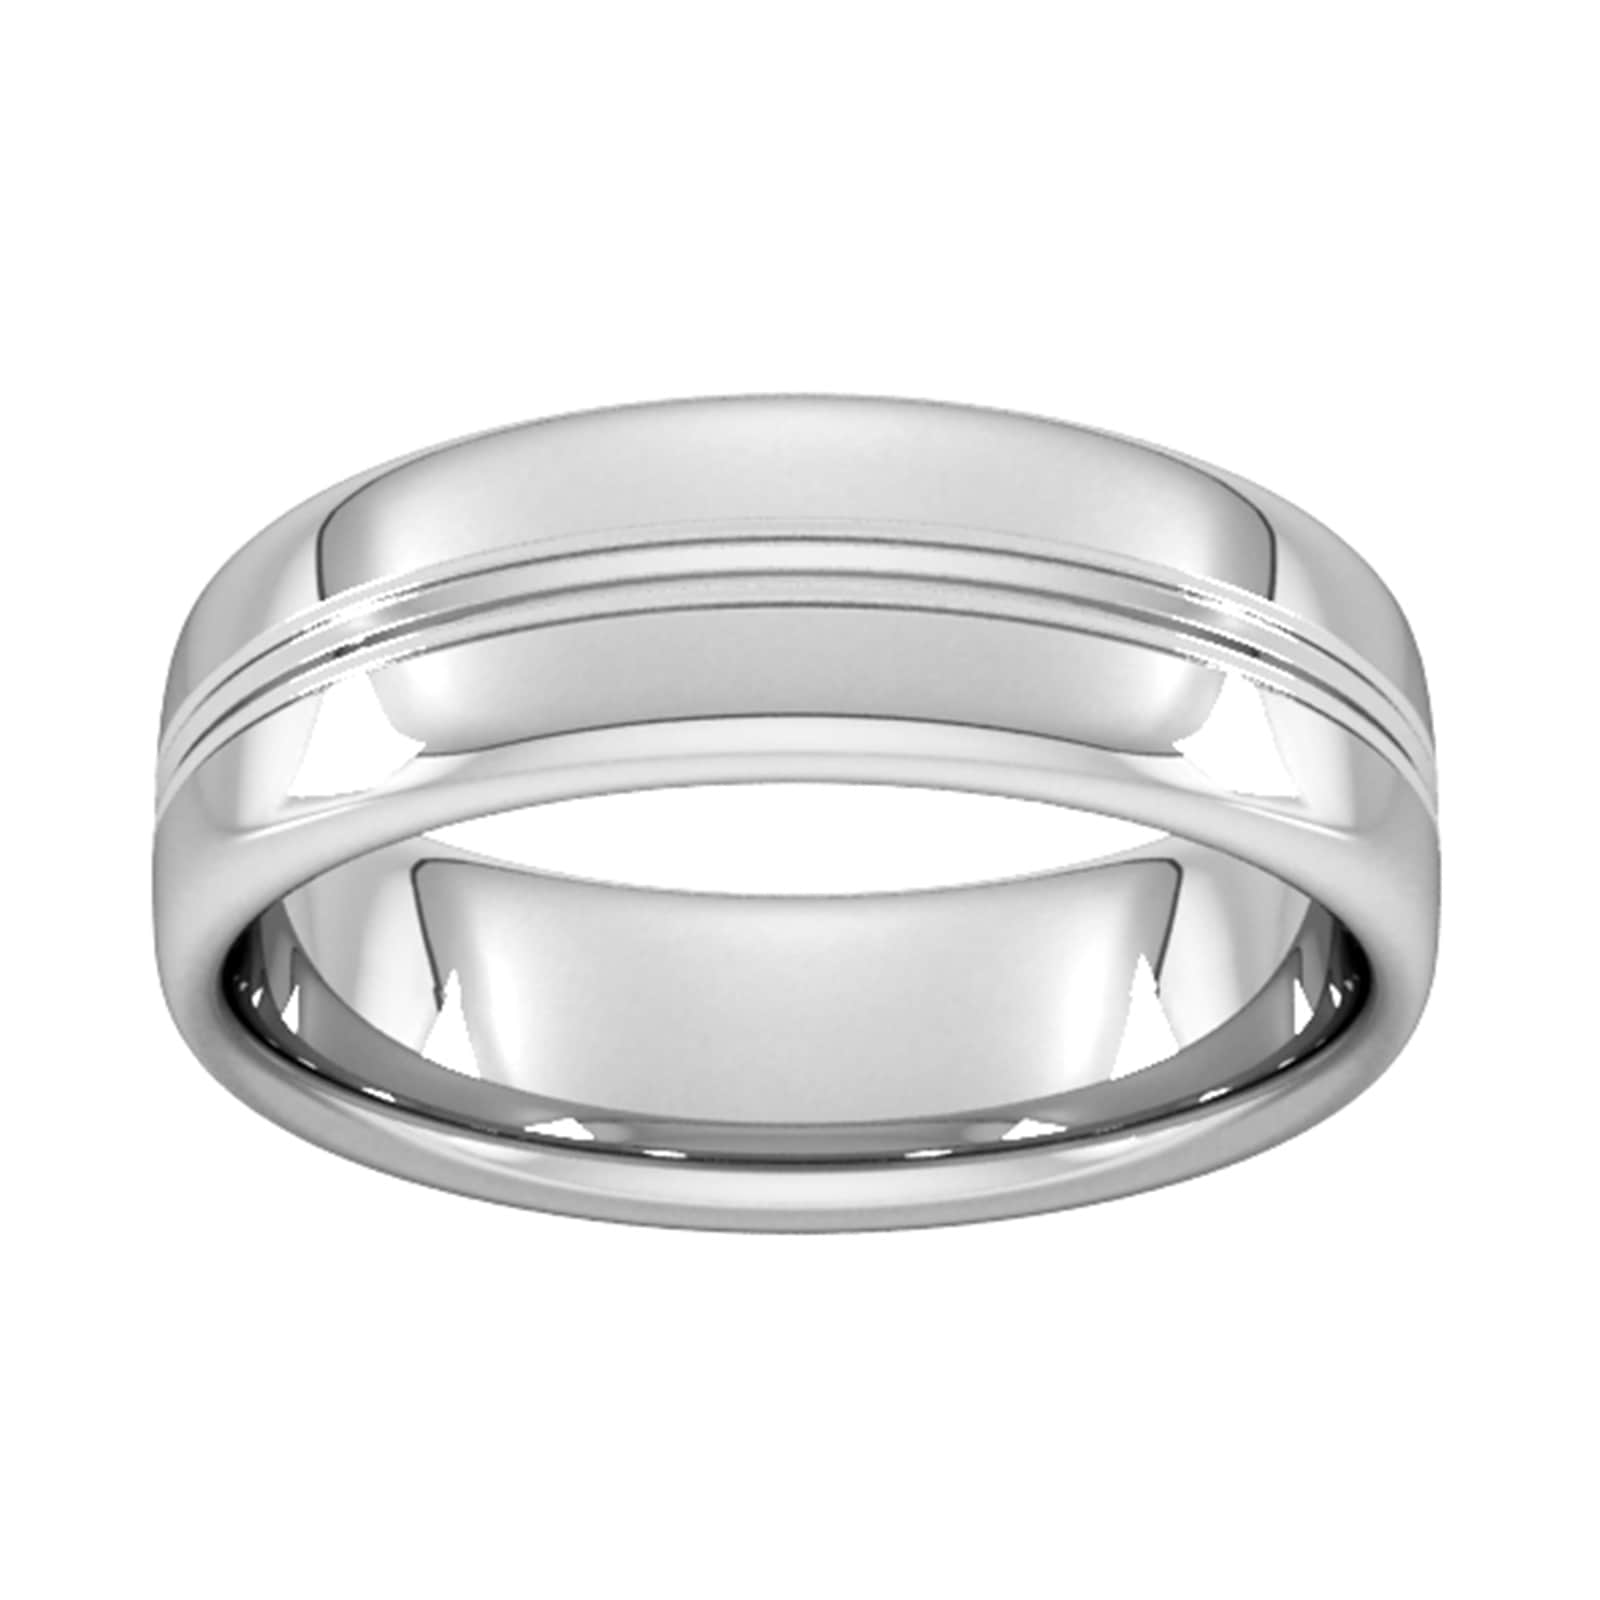 7mm Slight Court Heavy Grooved Polished Finish Wedding Ring In 950 Palladium - Ring Size S